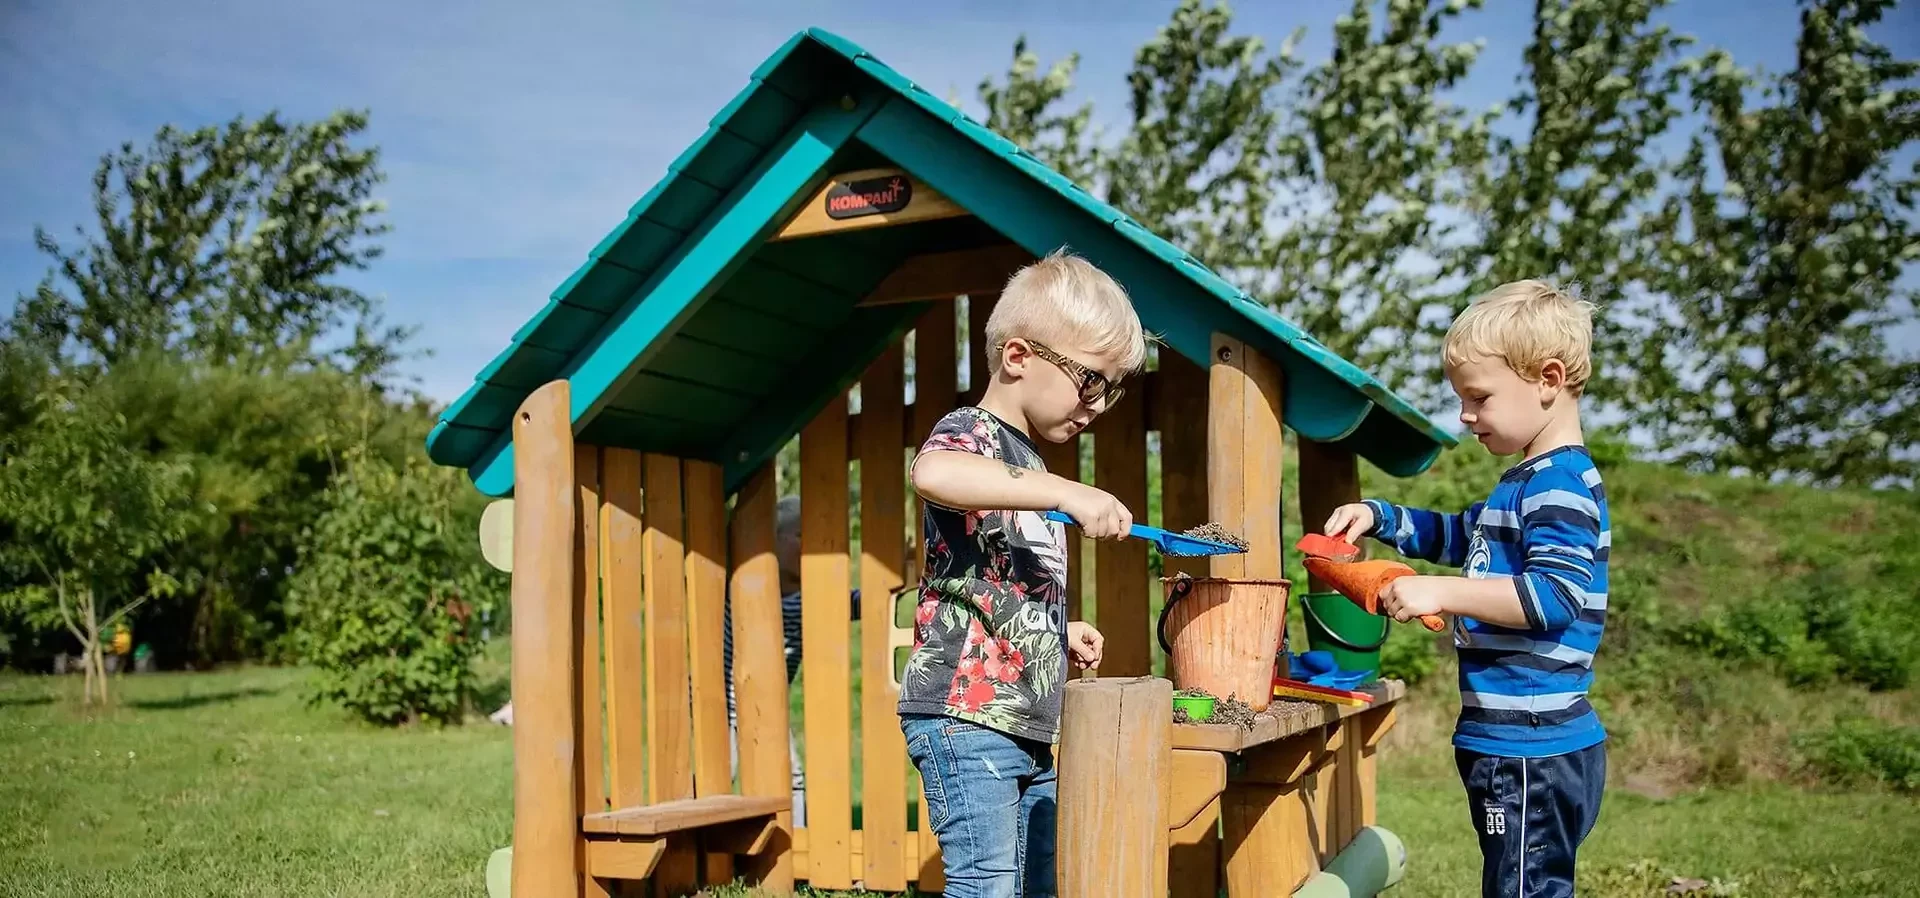 children playing on a wooden play hut playhouses playground